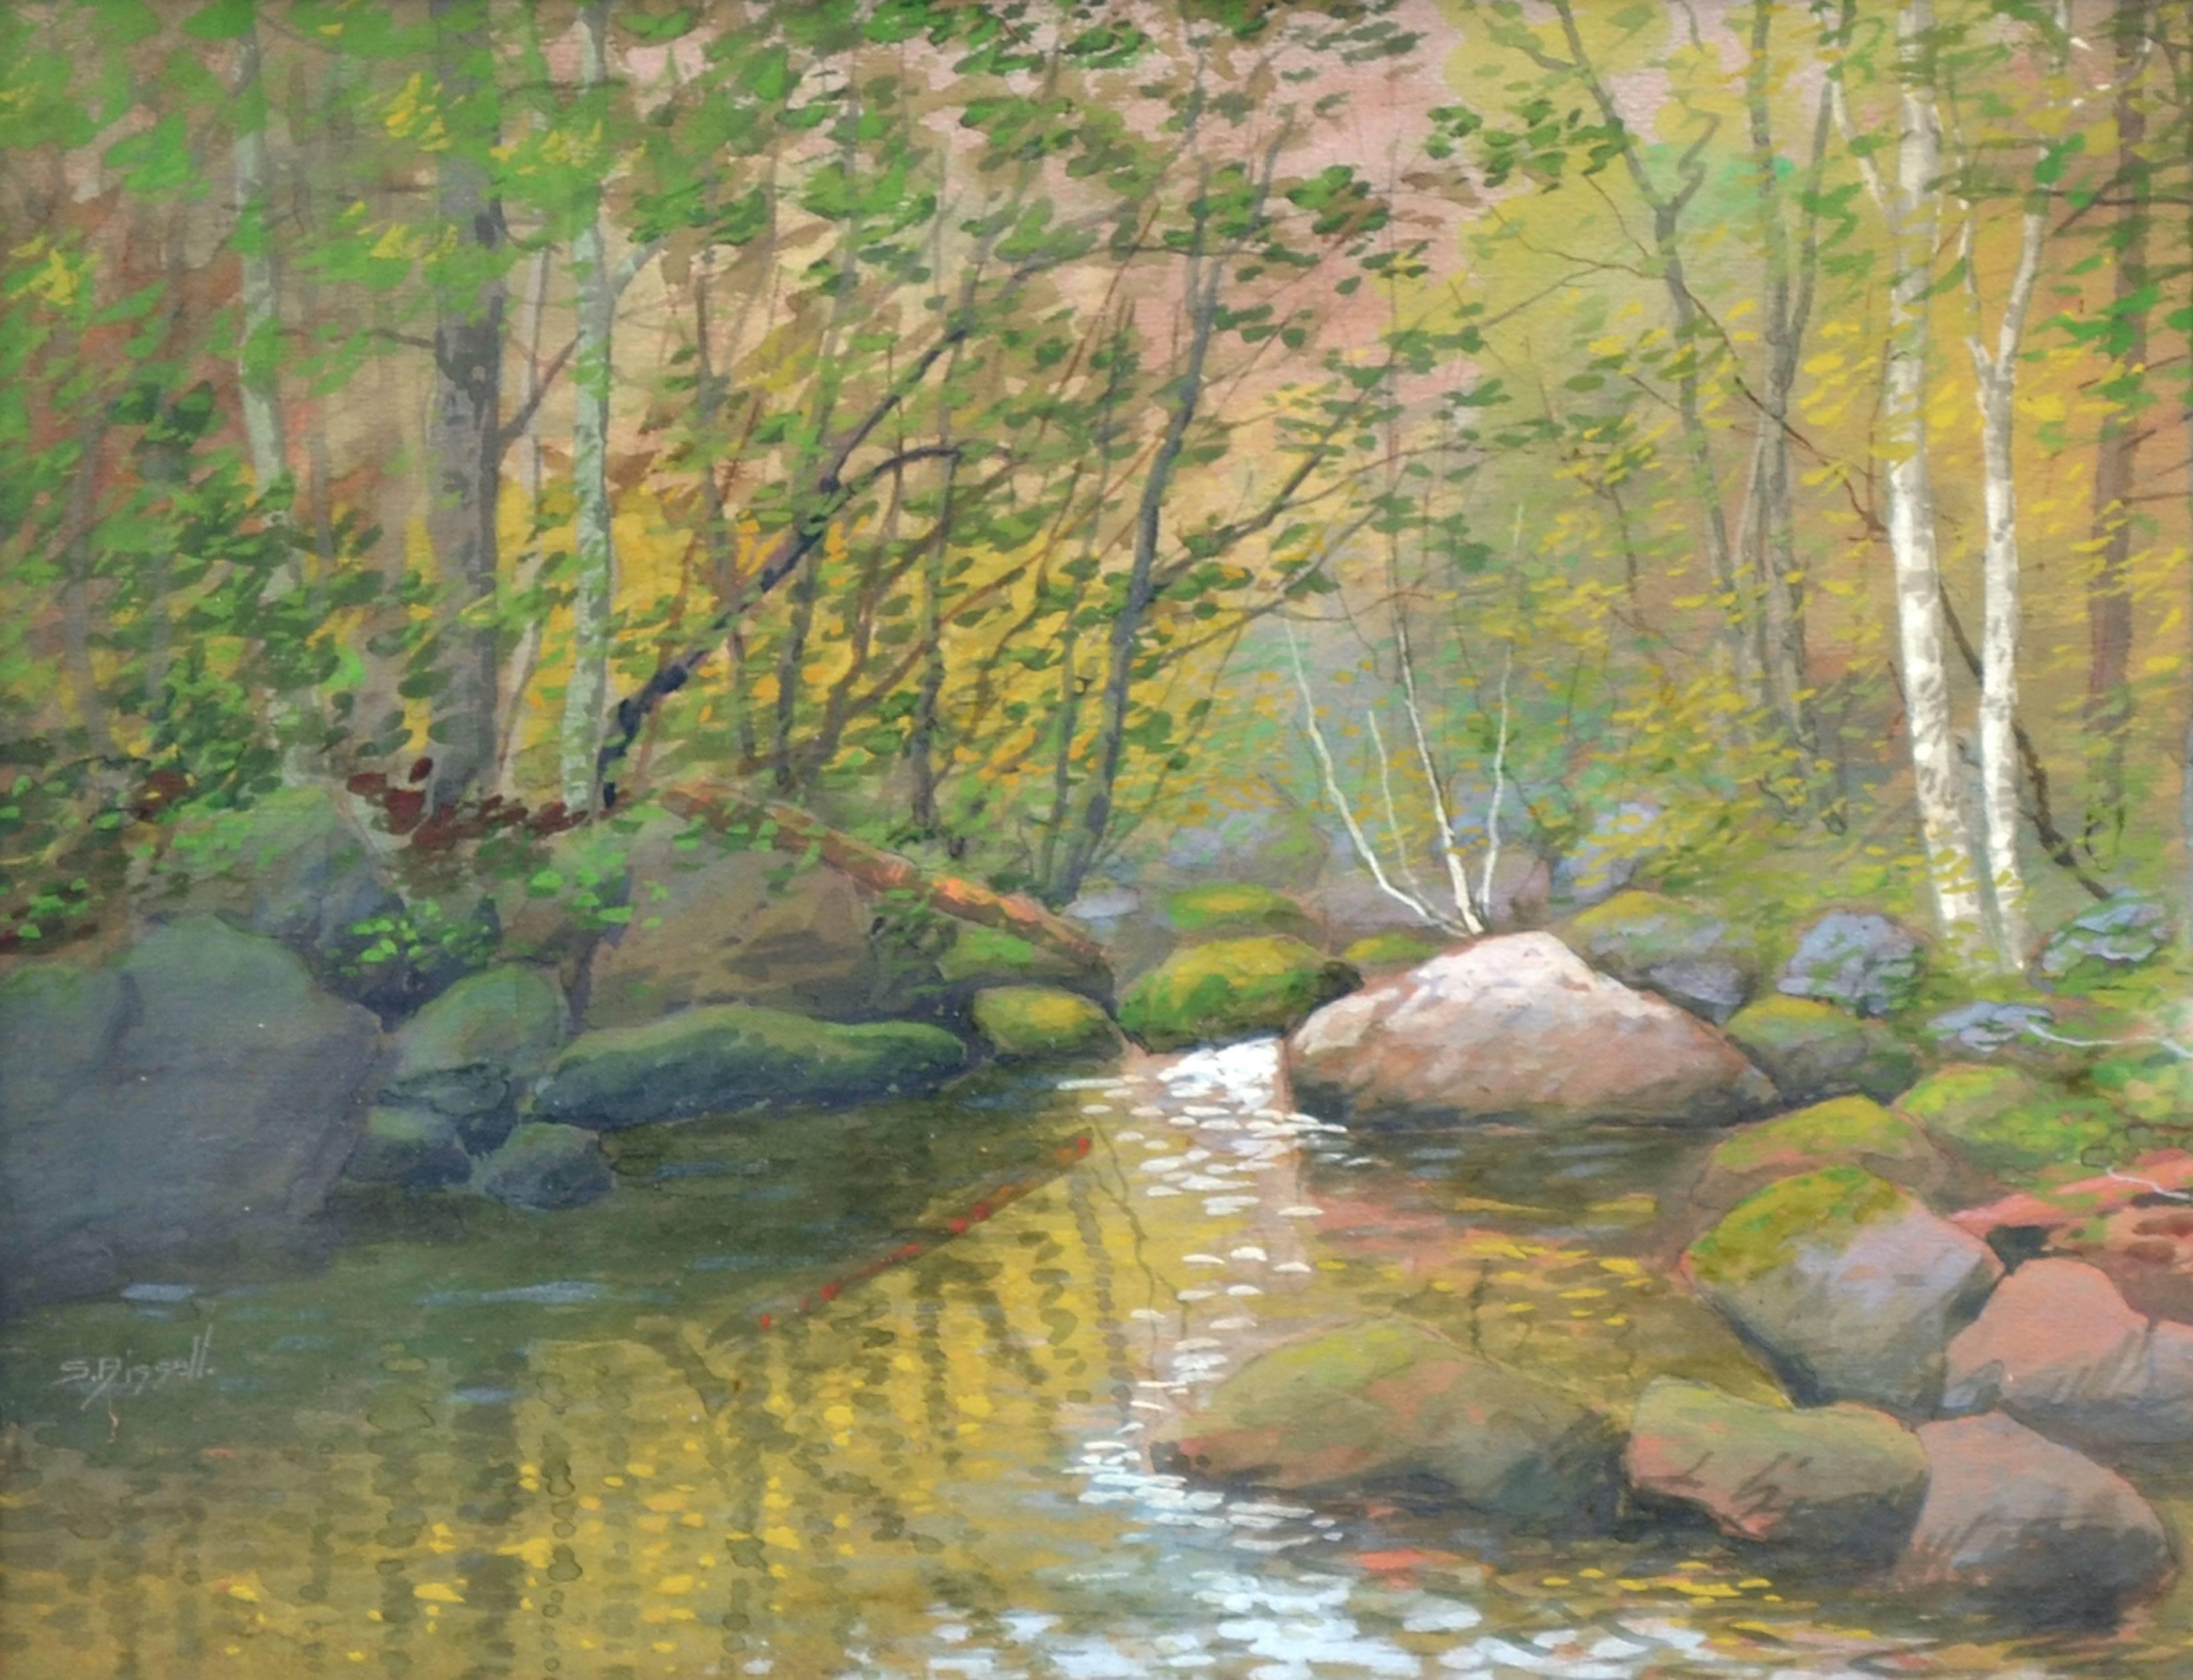 Late 19th Century Sunlight Brook Landscape - Painting by Susan Field Bissell